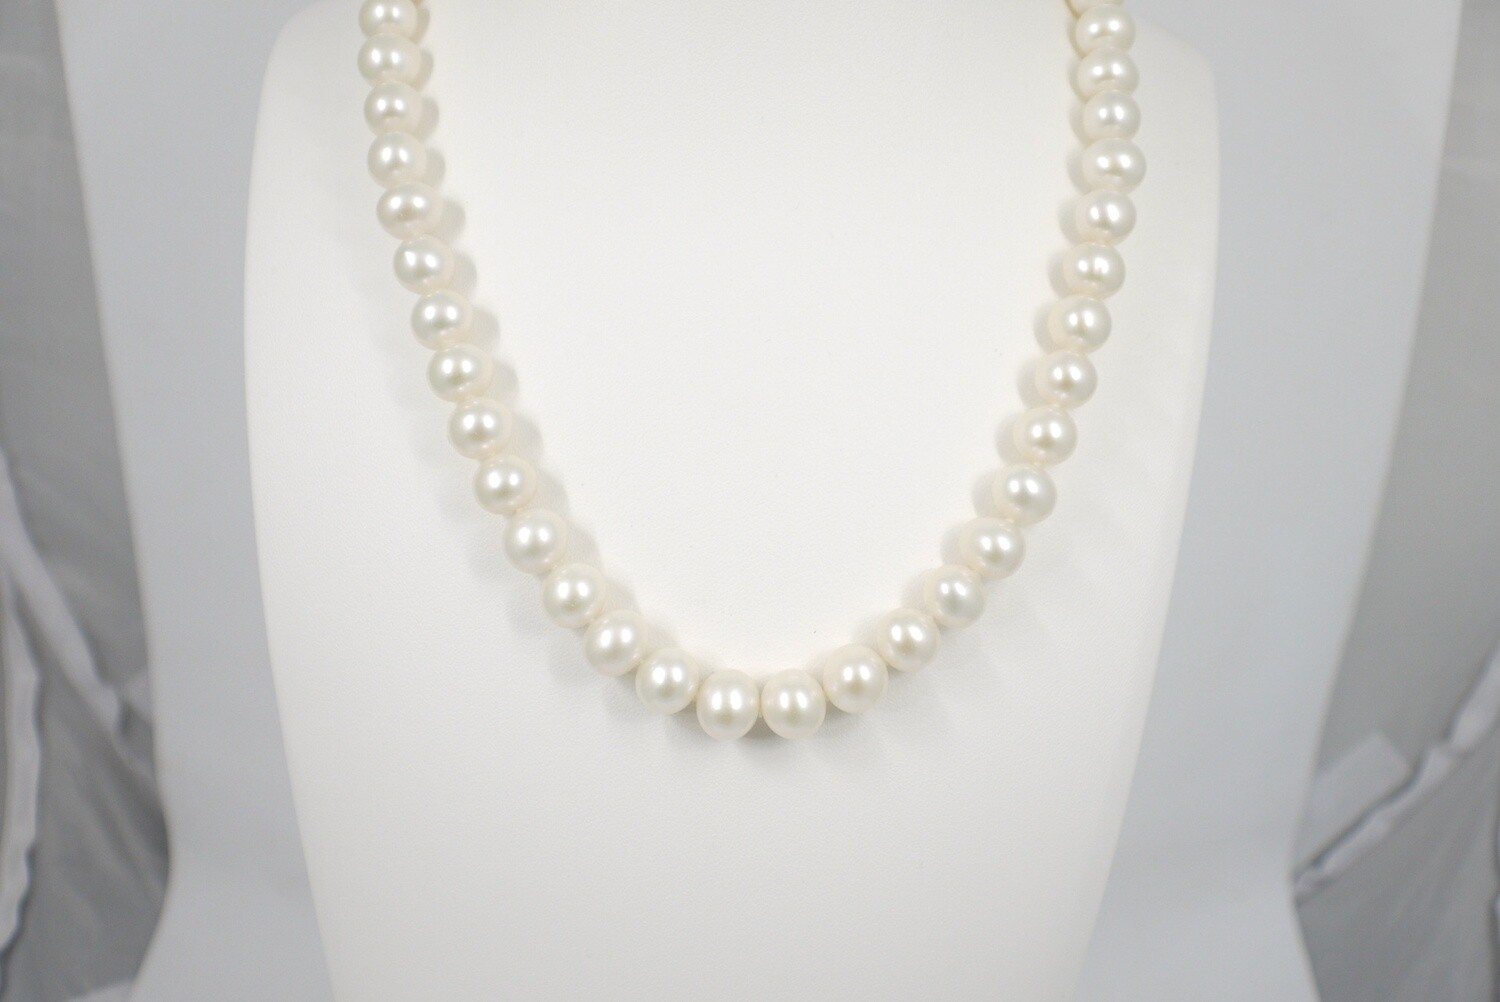 Row of pearls